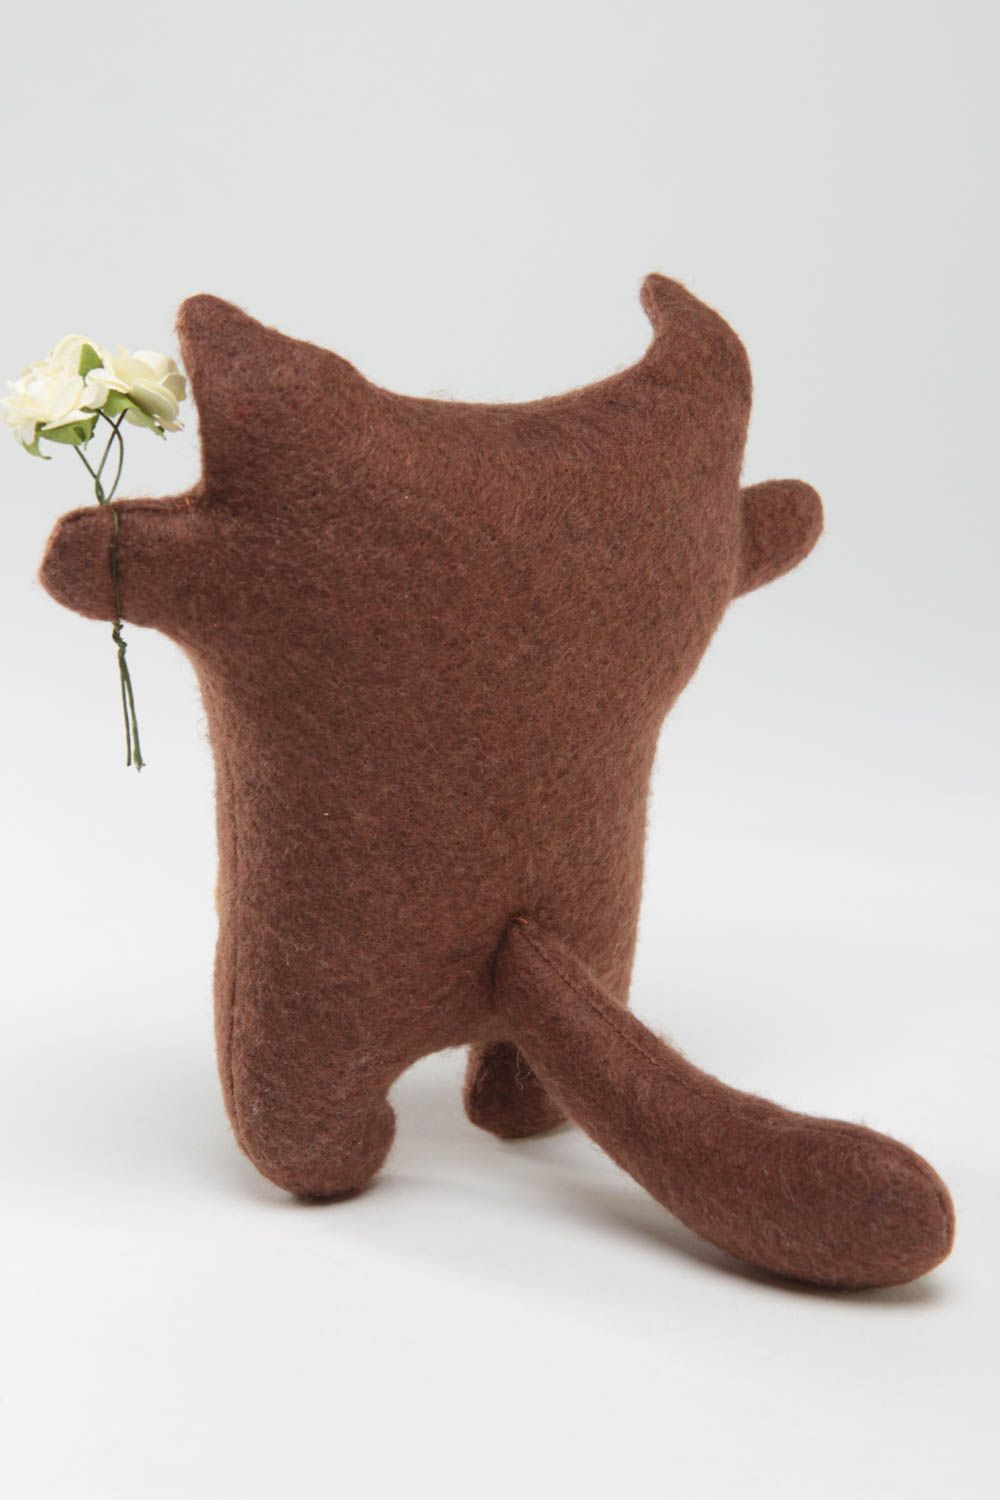 Handmade brown soft small toy made of felt in shape of cat with flowers photo 4